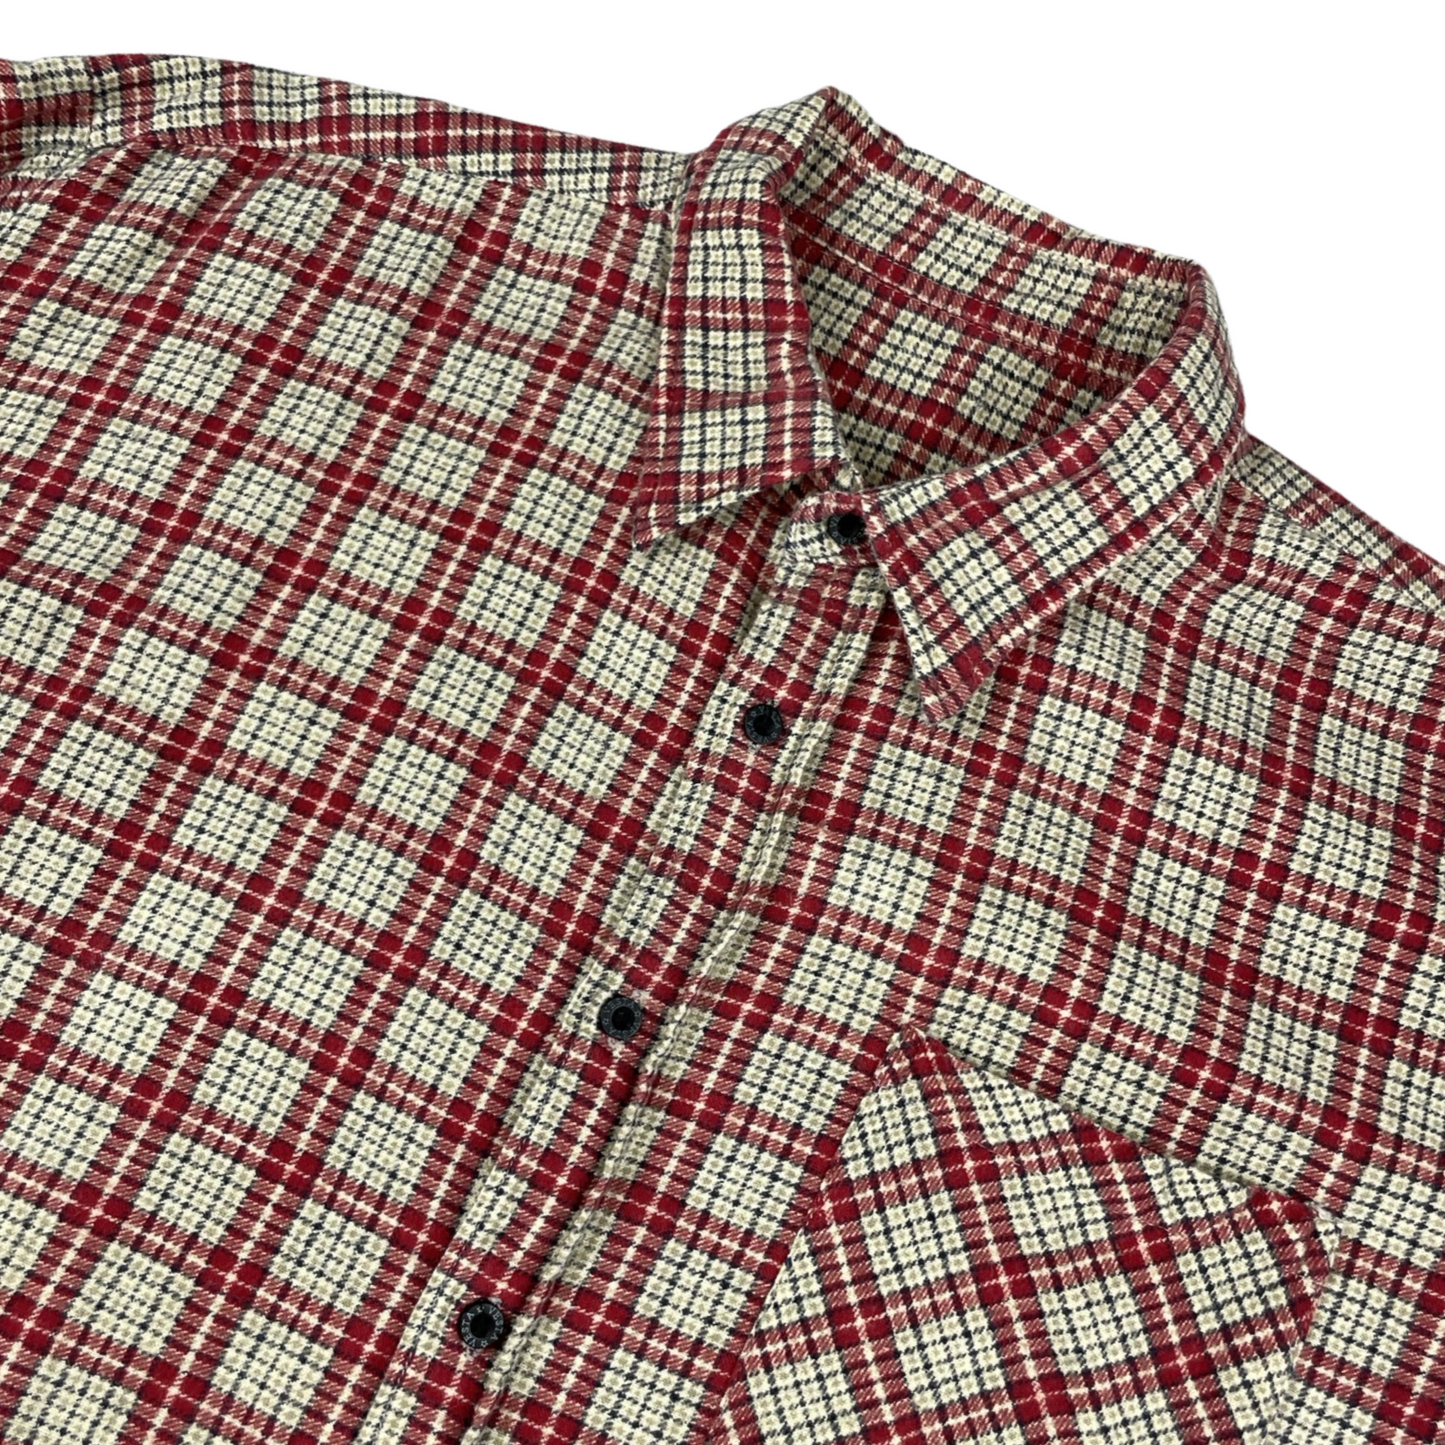 Vintage Red and Beige Plaid Flannel Shirt 3XL